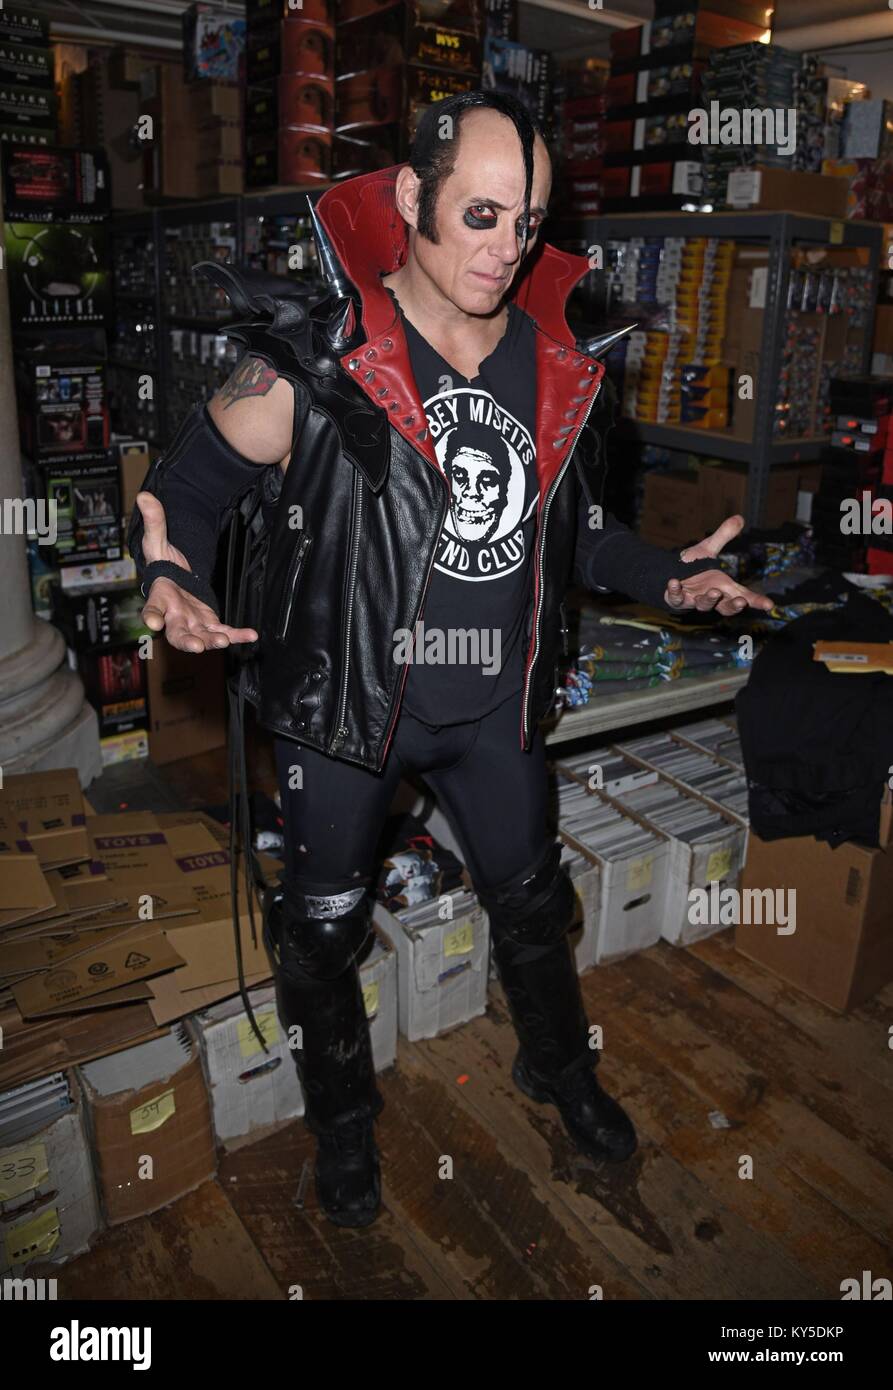 New York, NY, USA. 11th Jan, 2018. Jerry Only, The Misfits at arrivals for Dr. Demento Covered in Punk Release Party, Forbidden Planet, New York, NY January 11, 2018. Credit: Derek Storm/Everett Collection/Alamy Live News Stock Photo